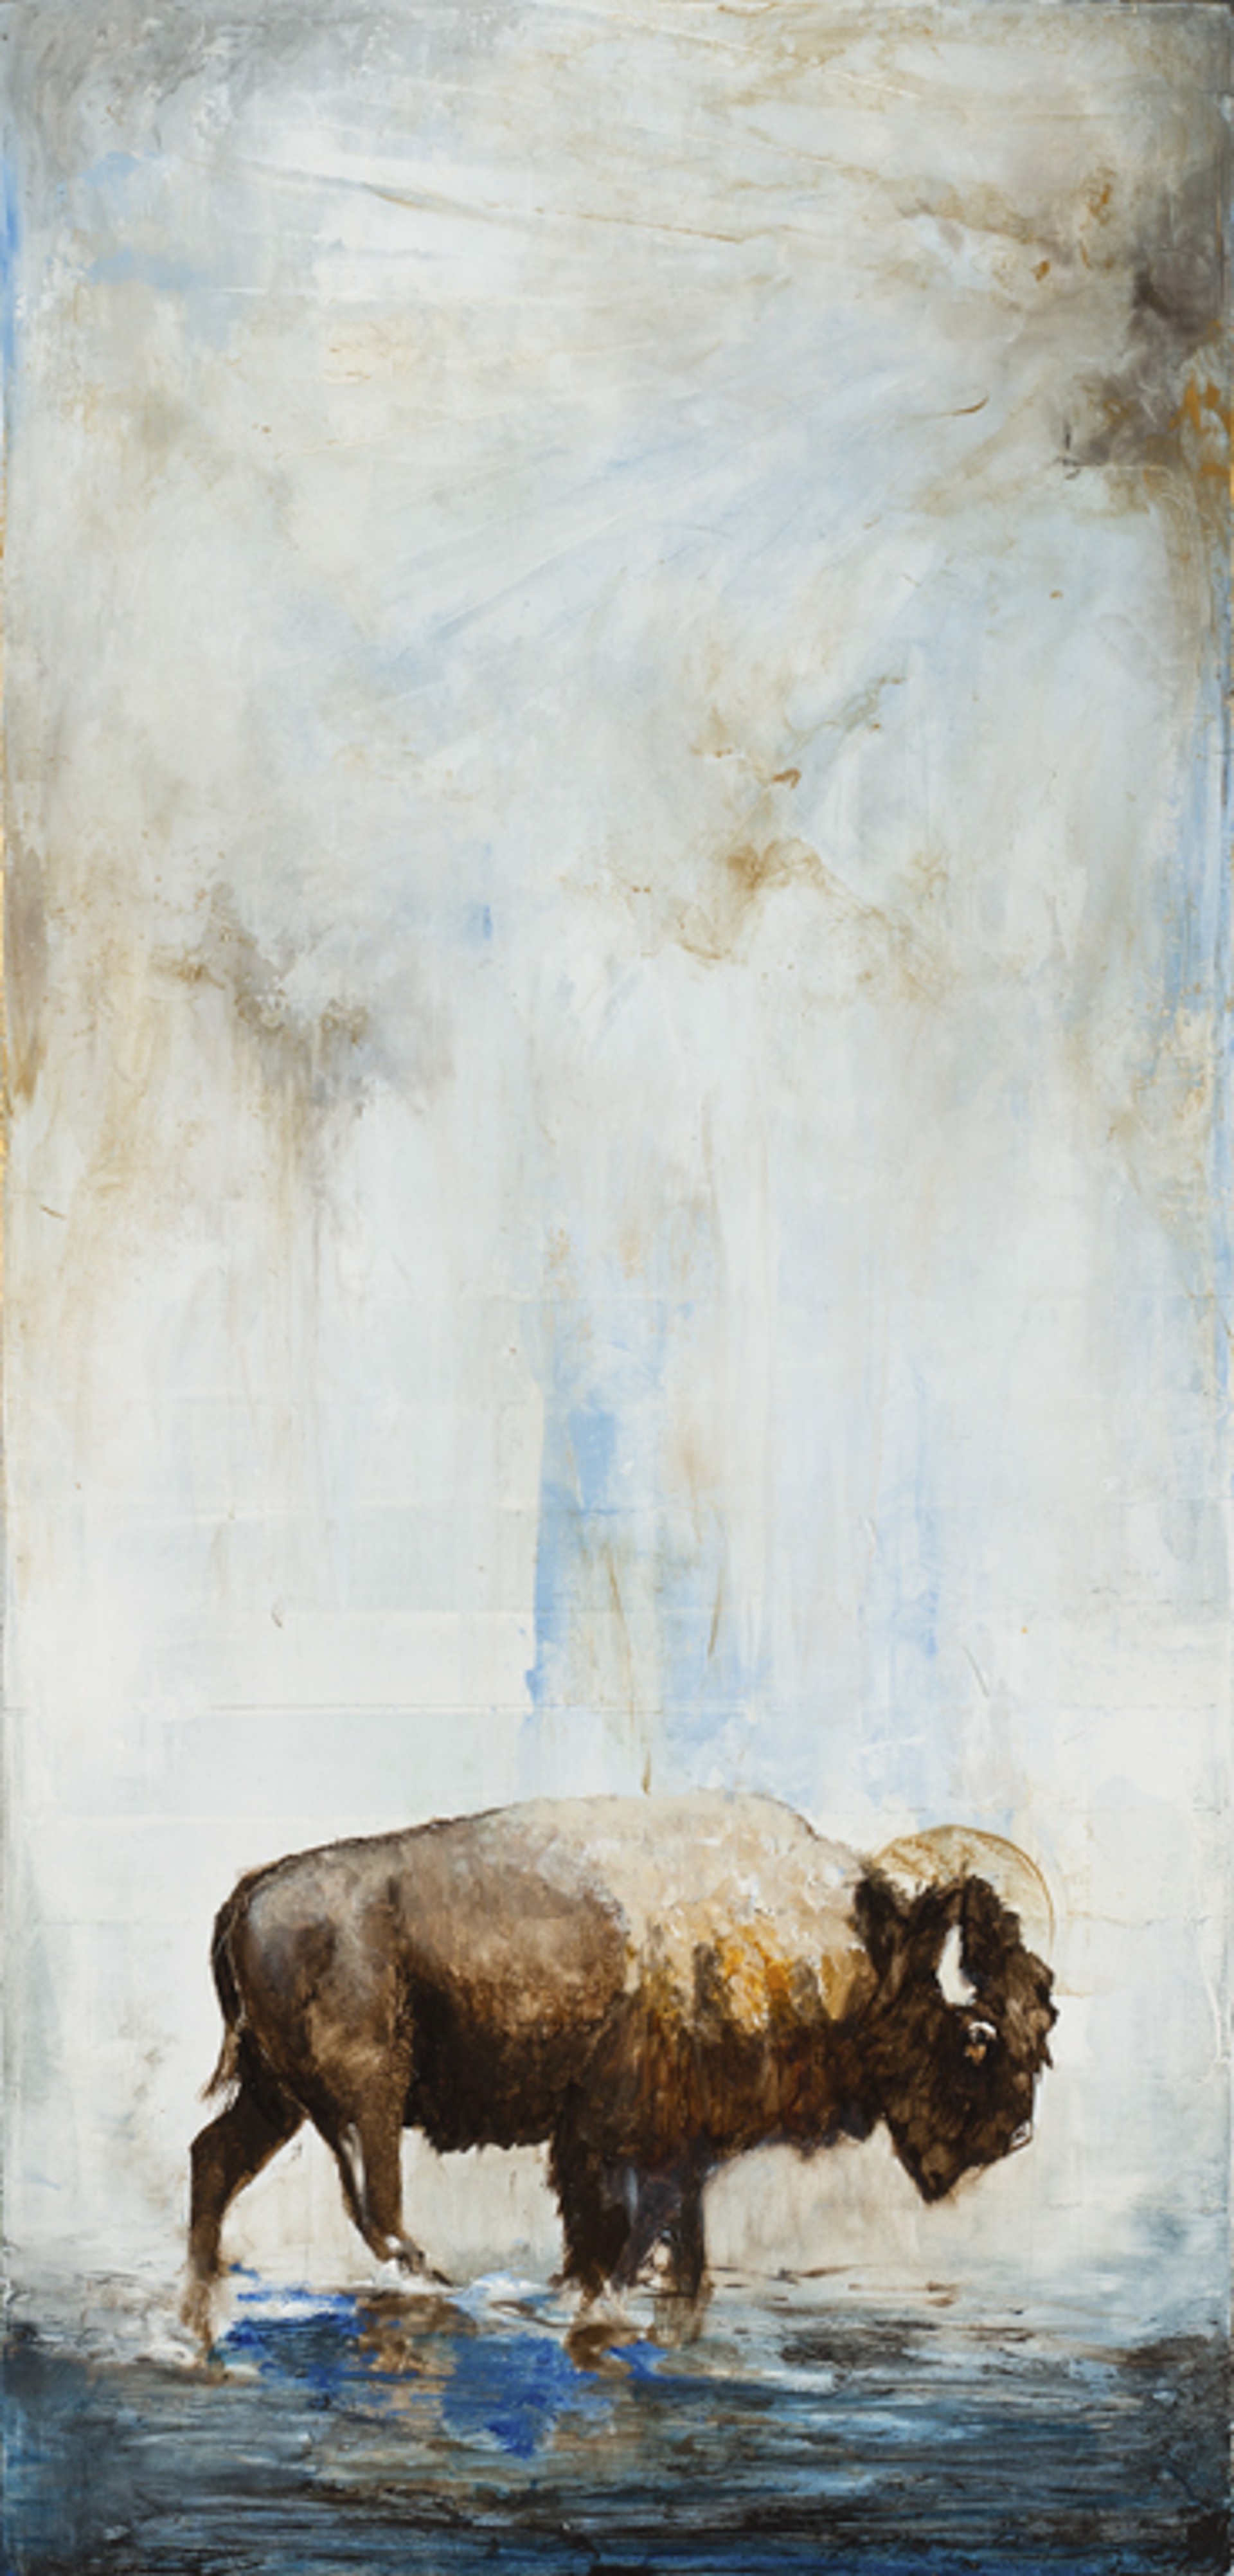 A Original Contemporary Oil Painting Of A Bison With Halo In Water With Abstract Waterfall Background, By Jenna Von Benedikt